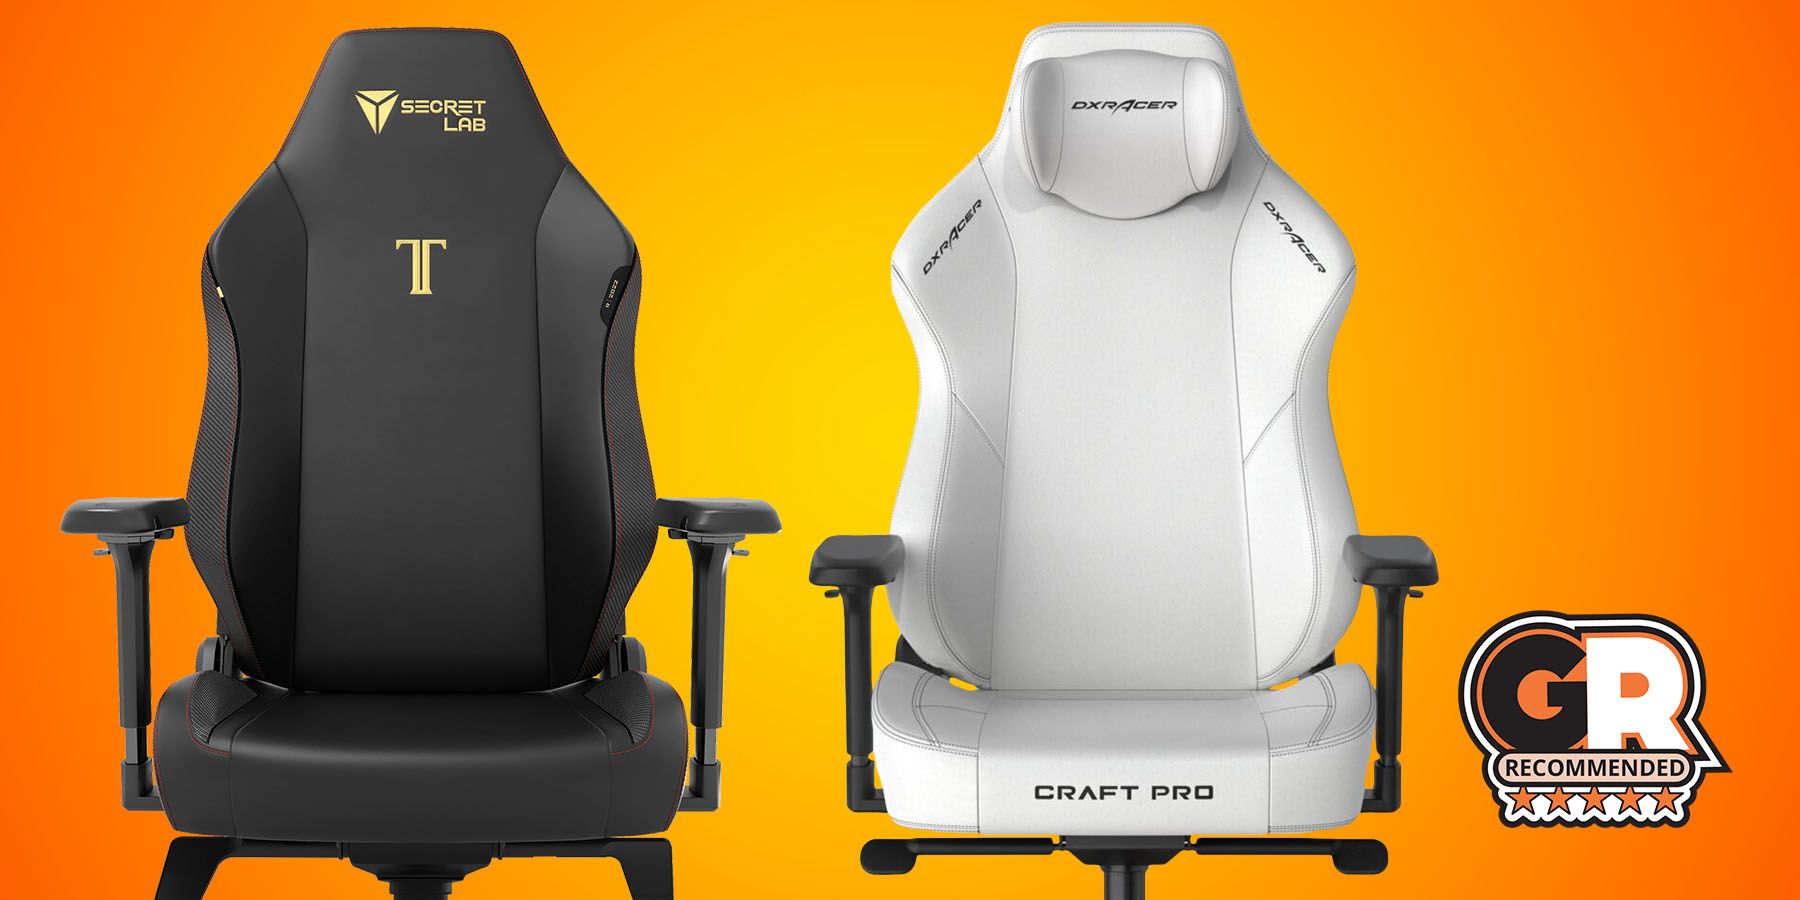 Secretlab vs. DXRacer: Which Gaming Chair Brand Should You Get?